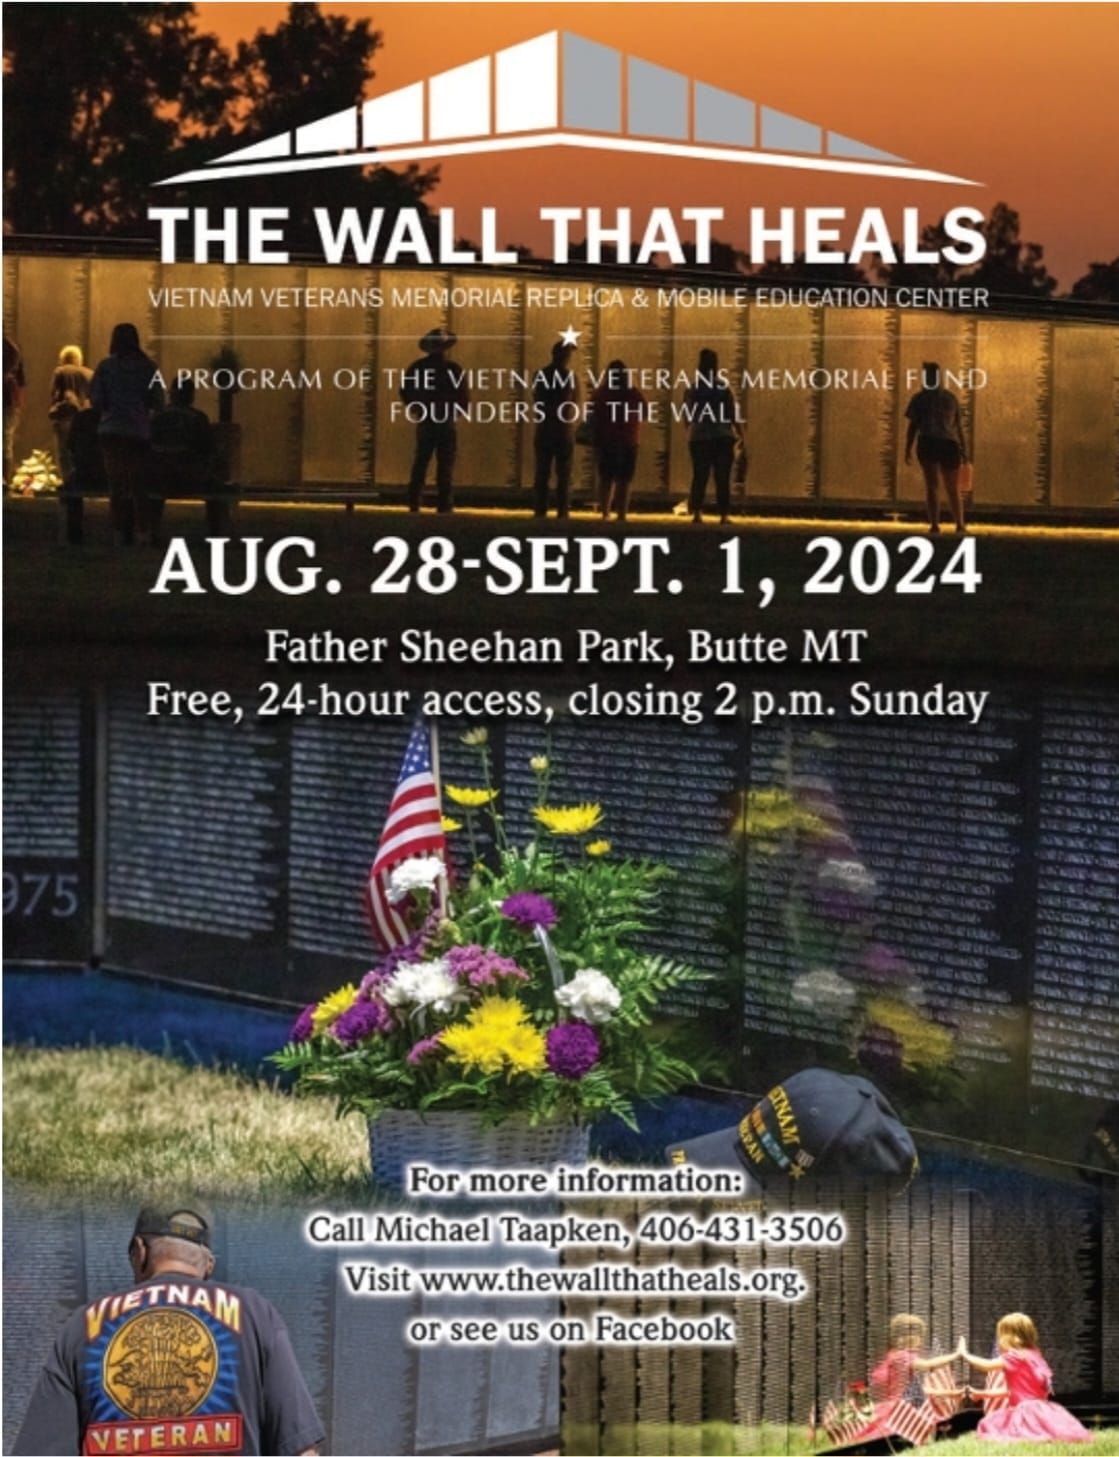 Southwest Montana Hosts The Wall That Heals